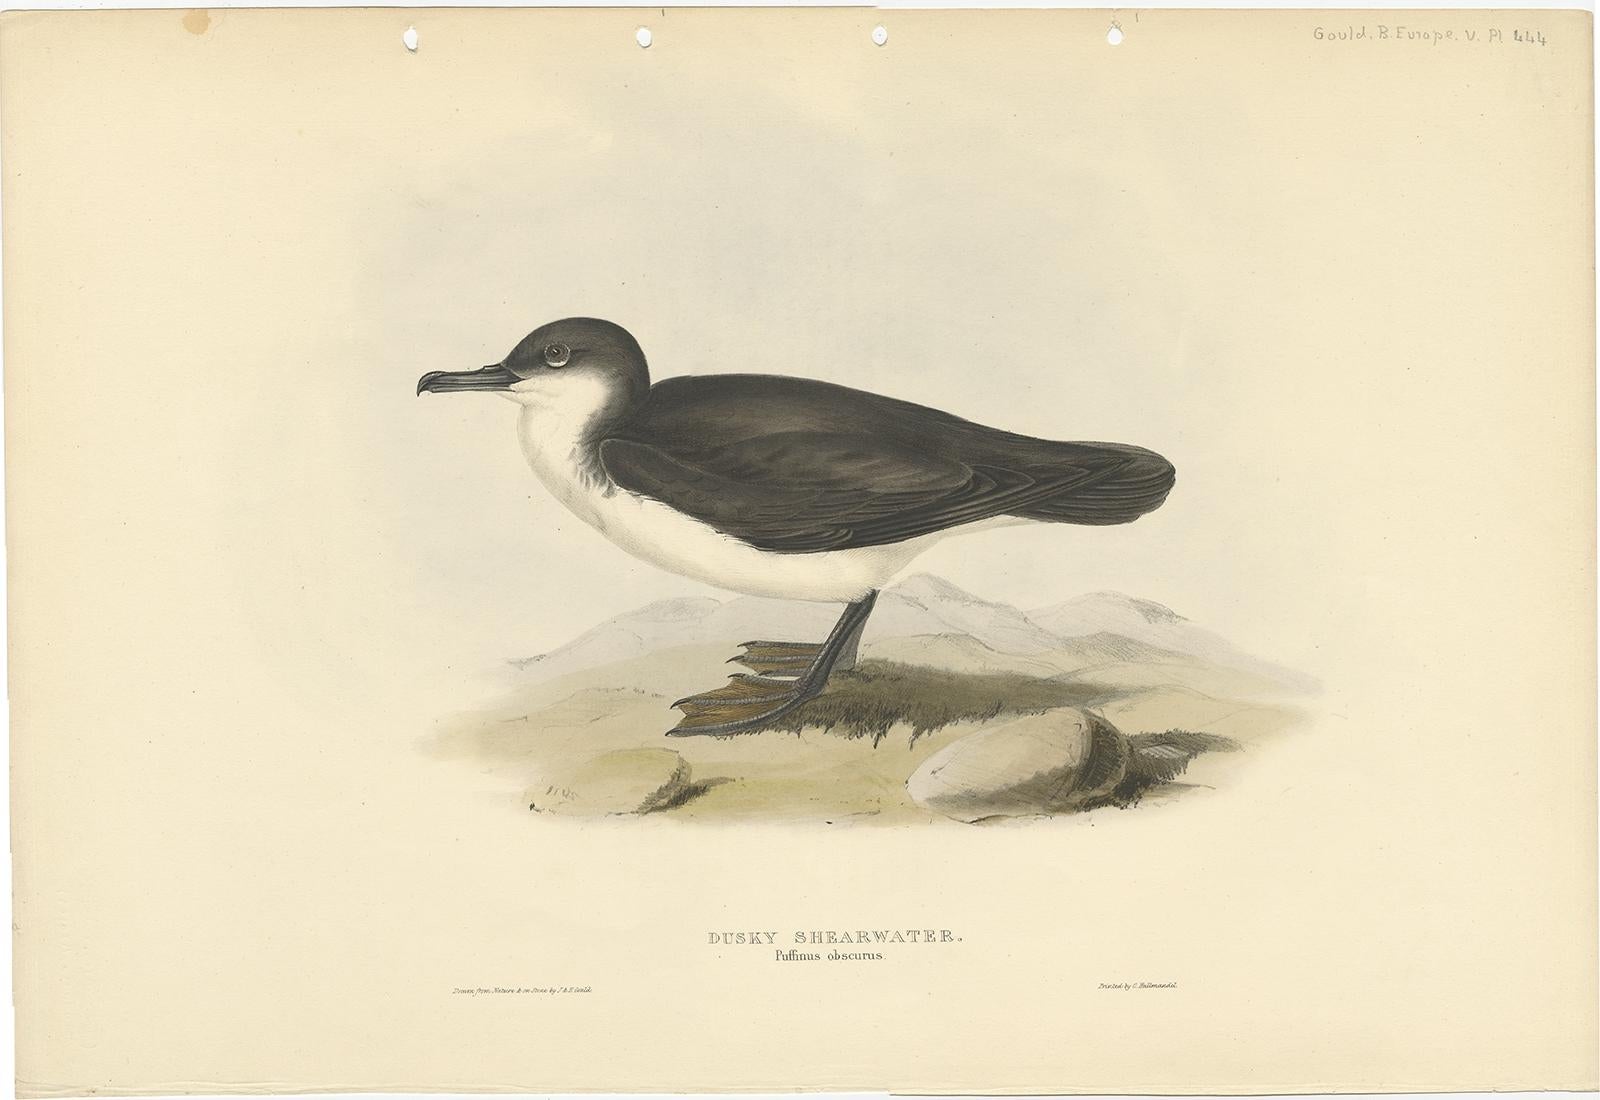 Antique bird print titled 'Dusky Shearwater'. 

Old bird print depicting the dusky shearwater. This print originates from 'Birds of Europe' by J. Gould (1832-1837).

Audubon's shearwater (Puffinus lherminieri) is a common tropical seabird in the